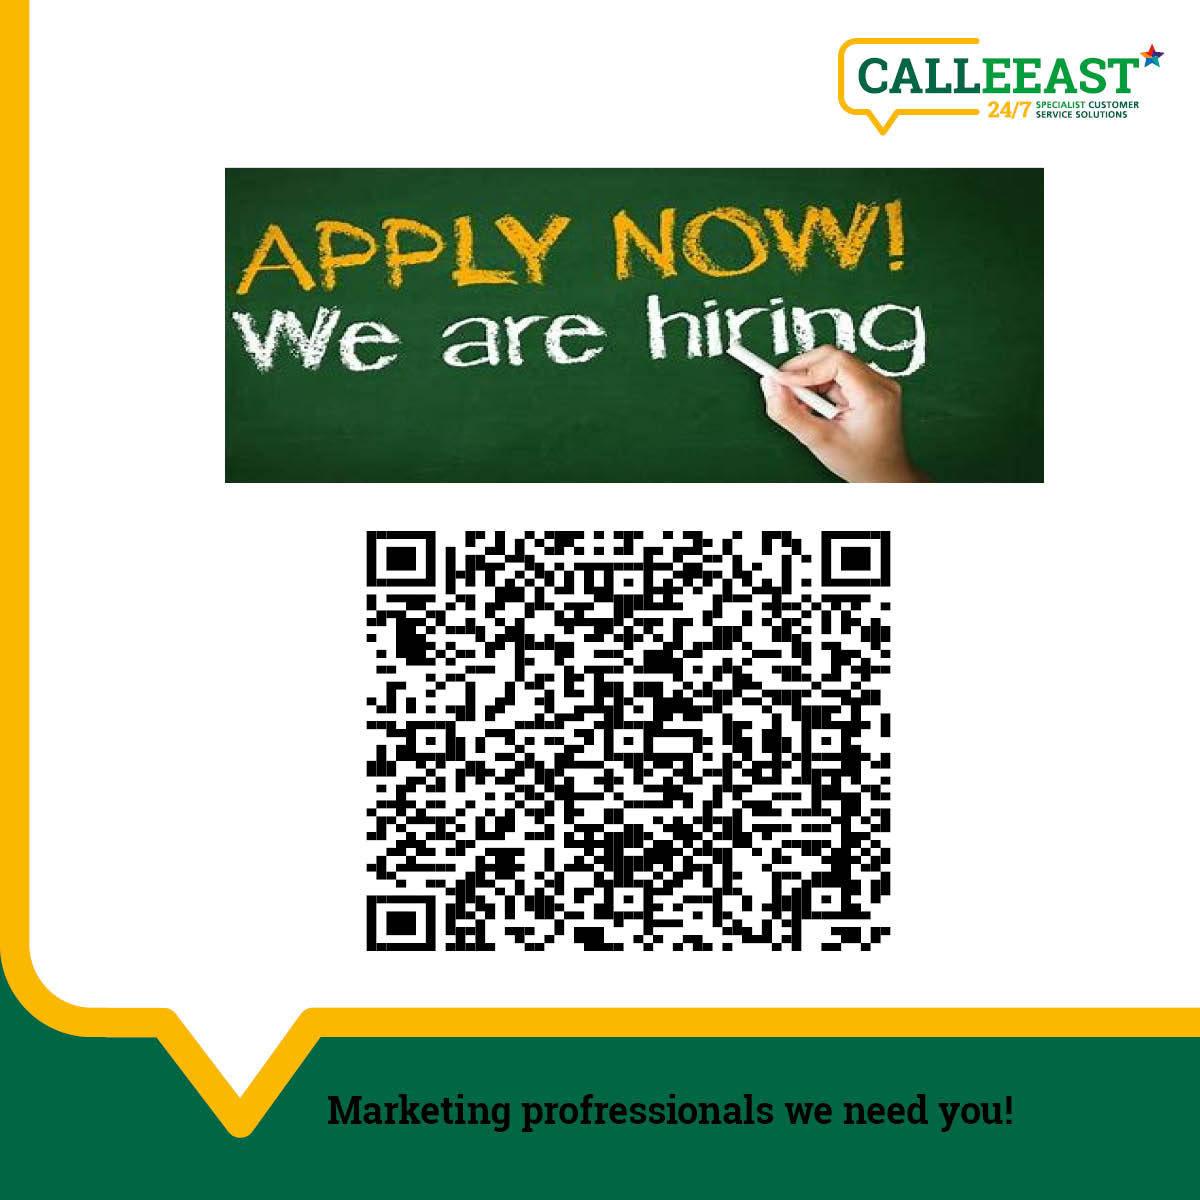 Are you a marketing professional, or do you know a marketing professional? If so we want to hear from you!

#Marketingmanager #Marketing #Marketingjobs #Jobs #Norwichjobs #marketingprofessional #wewanttohearfromyou #work #hiring #career #weareCallEEAST #employment #careerchat